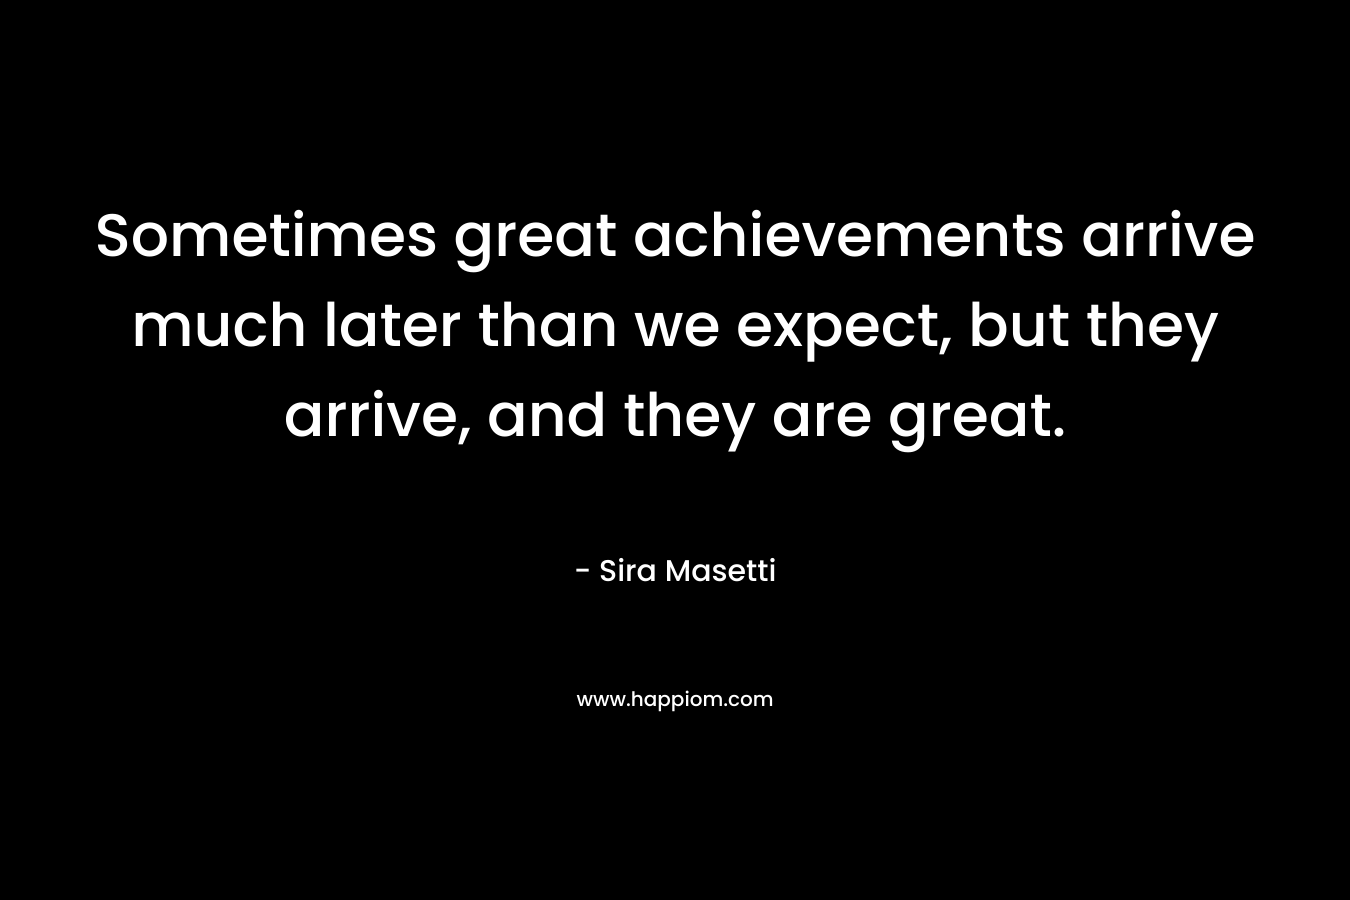 Sometimes great achievements arrive much later than we expect, but they arrive, and they are great.